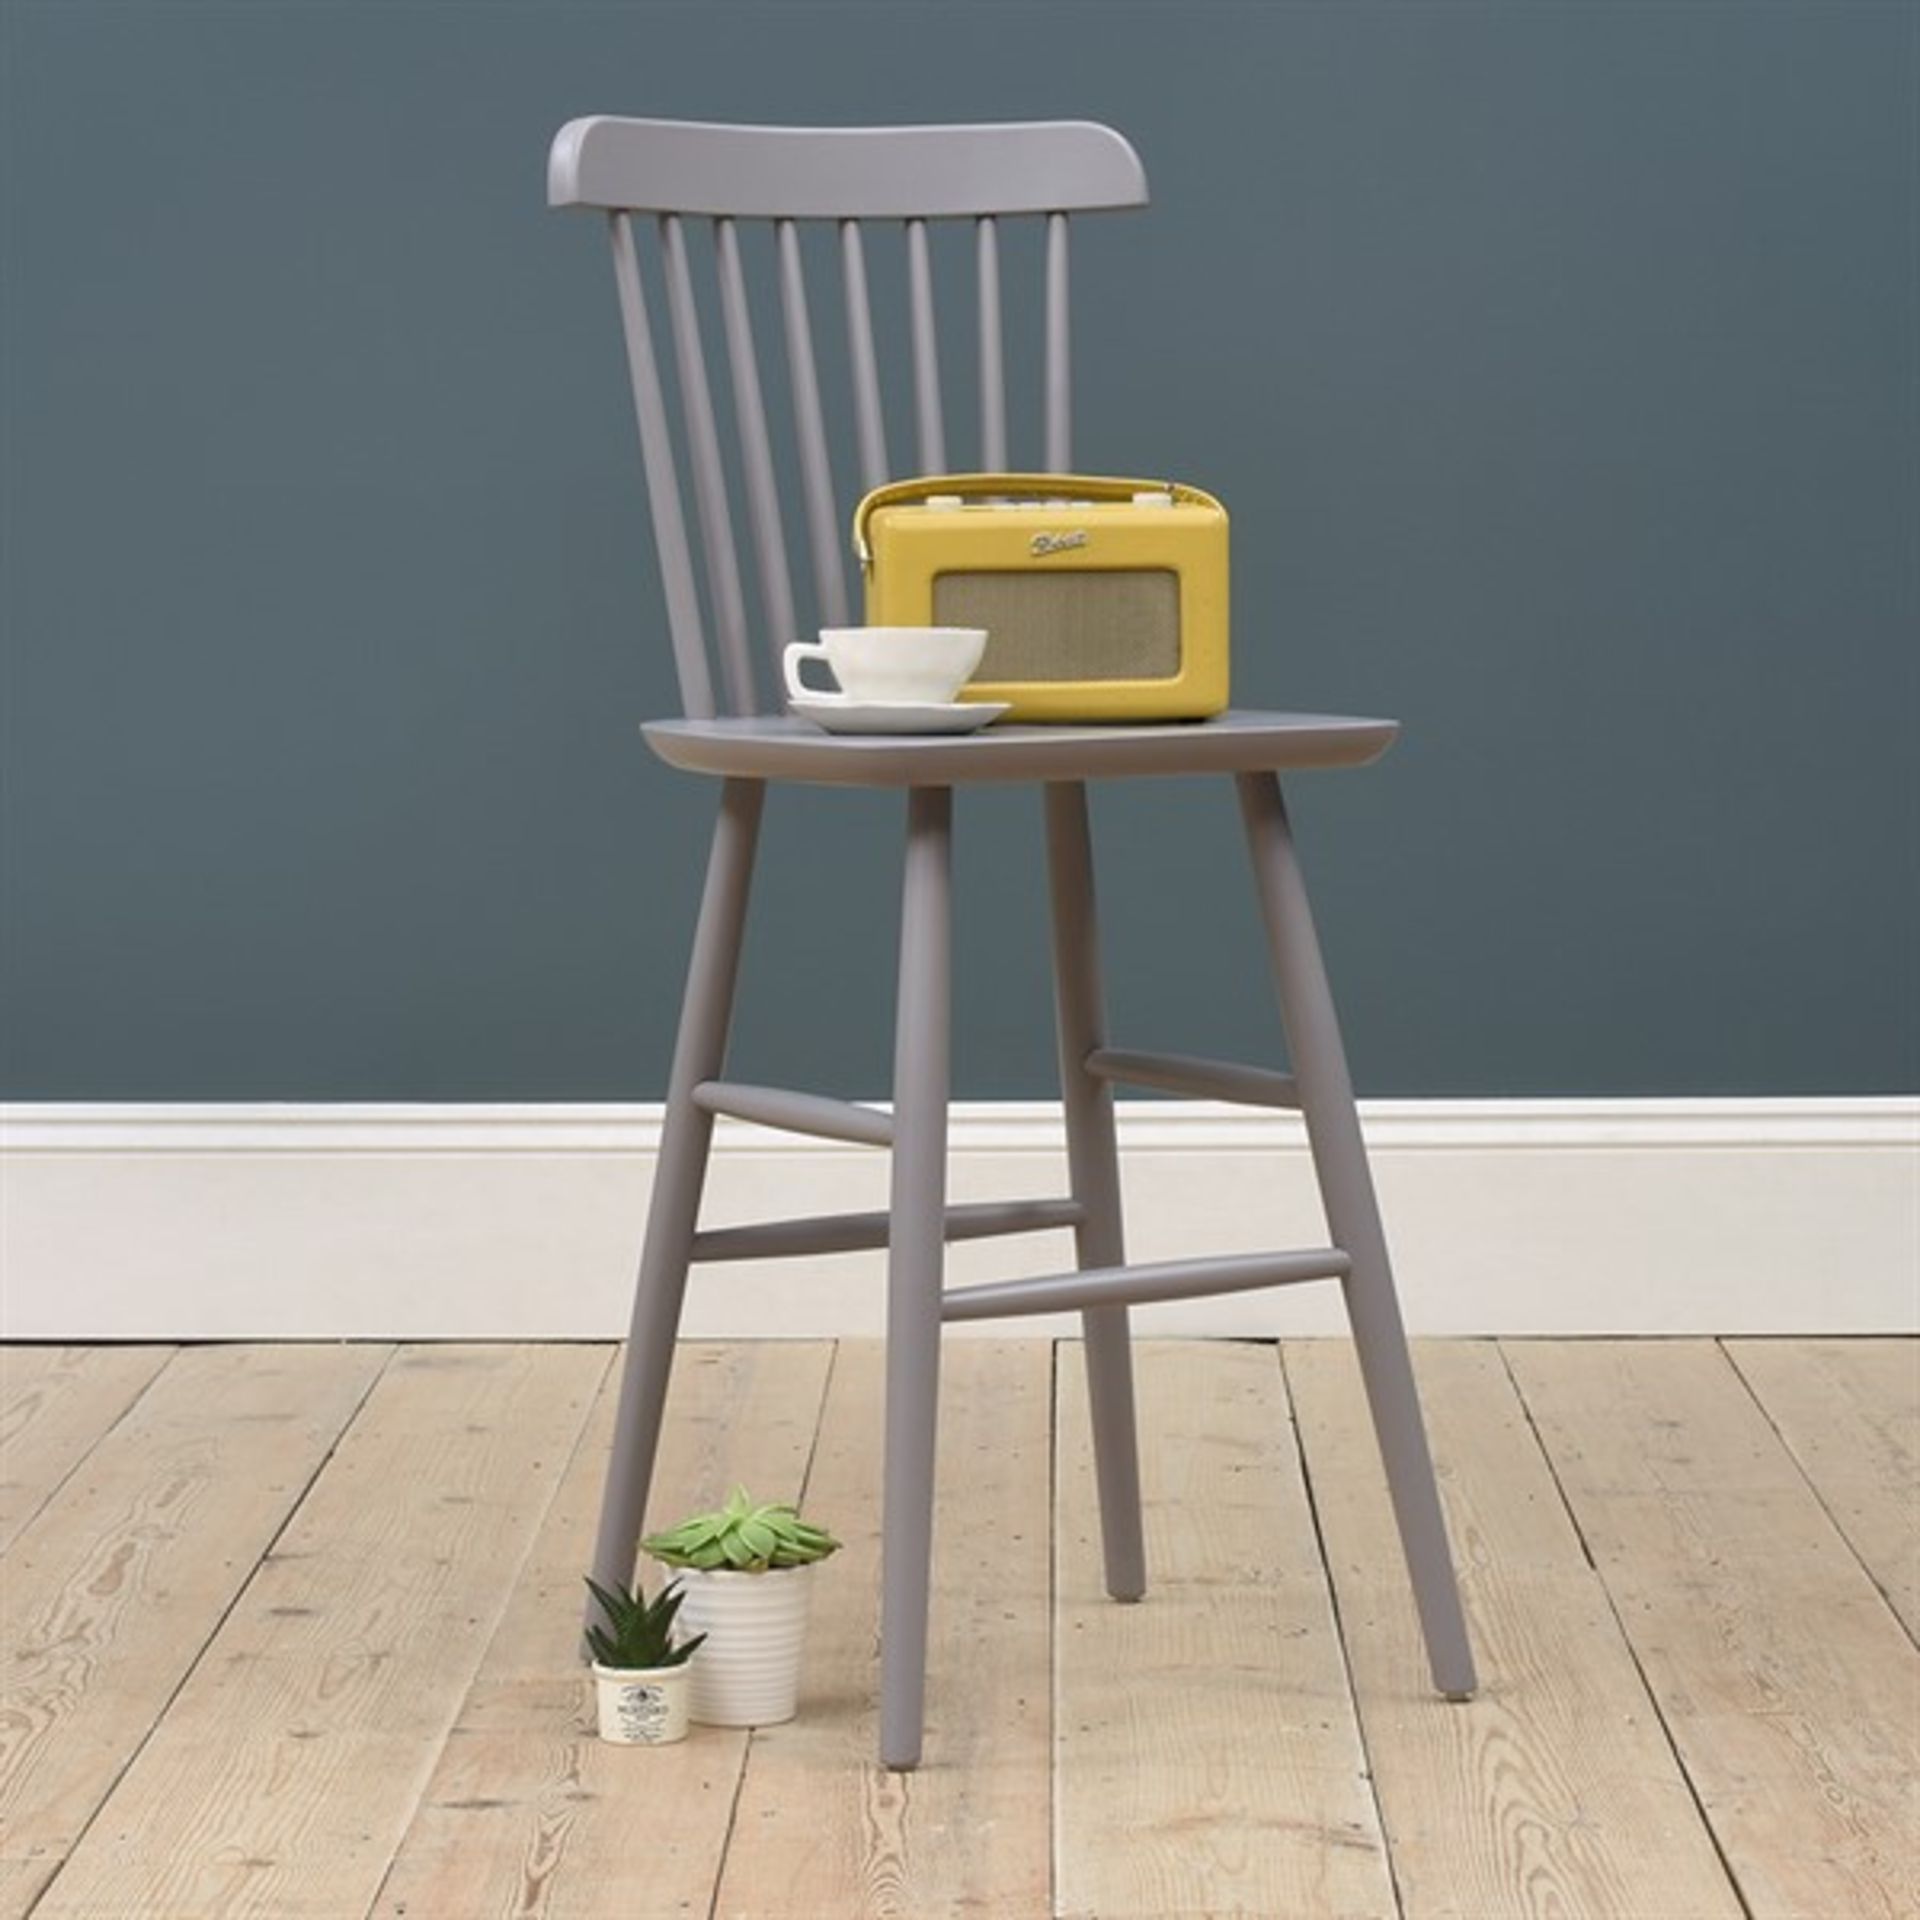 Cotswold Company Spindleback Bar Stool in Storm Grey RRP £145.00